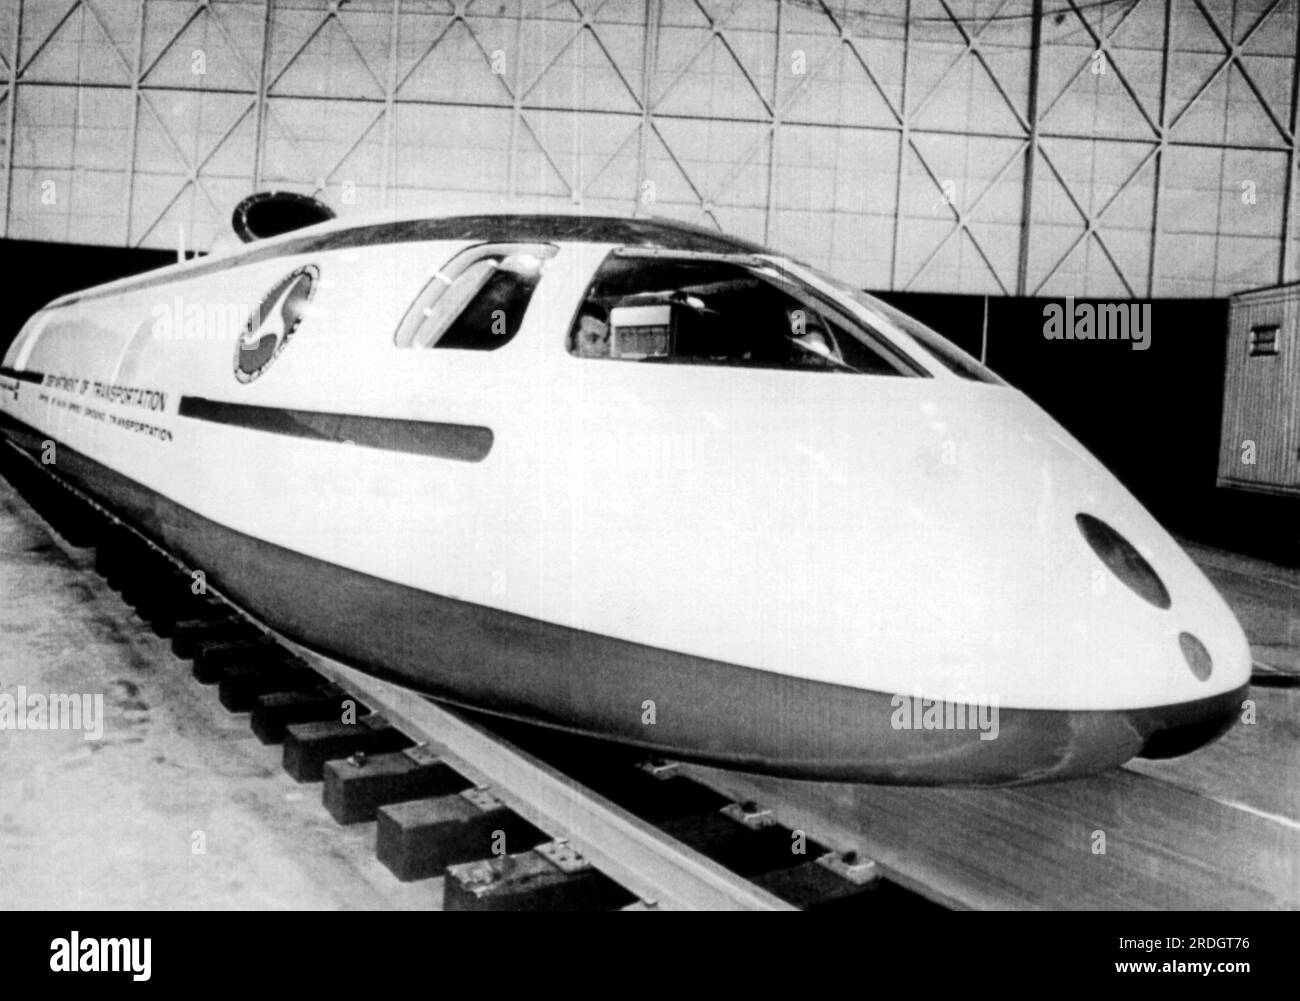 Los Angeles, California:  December 9, 1969 An ultra-streamlined test train built by the Garrett Corporation for the U.S. Dept. of Transportation. It is powered by a linear induction motor and is designed to operate at speeds up to 250 mph. Stock Photo